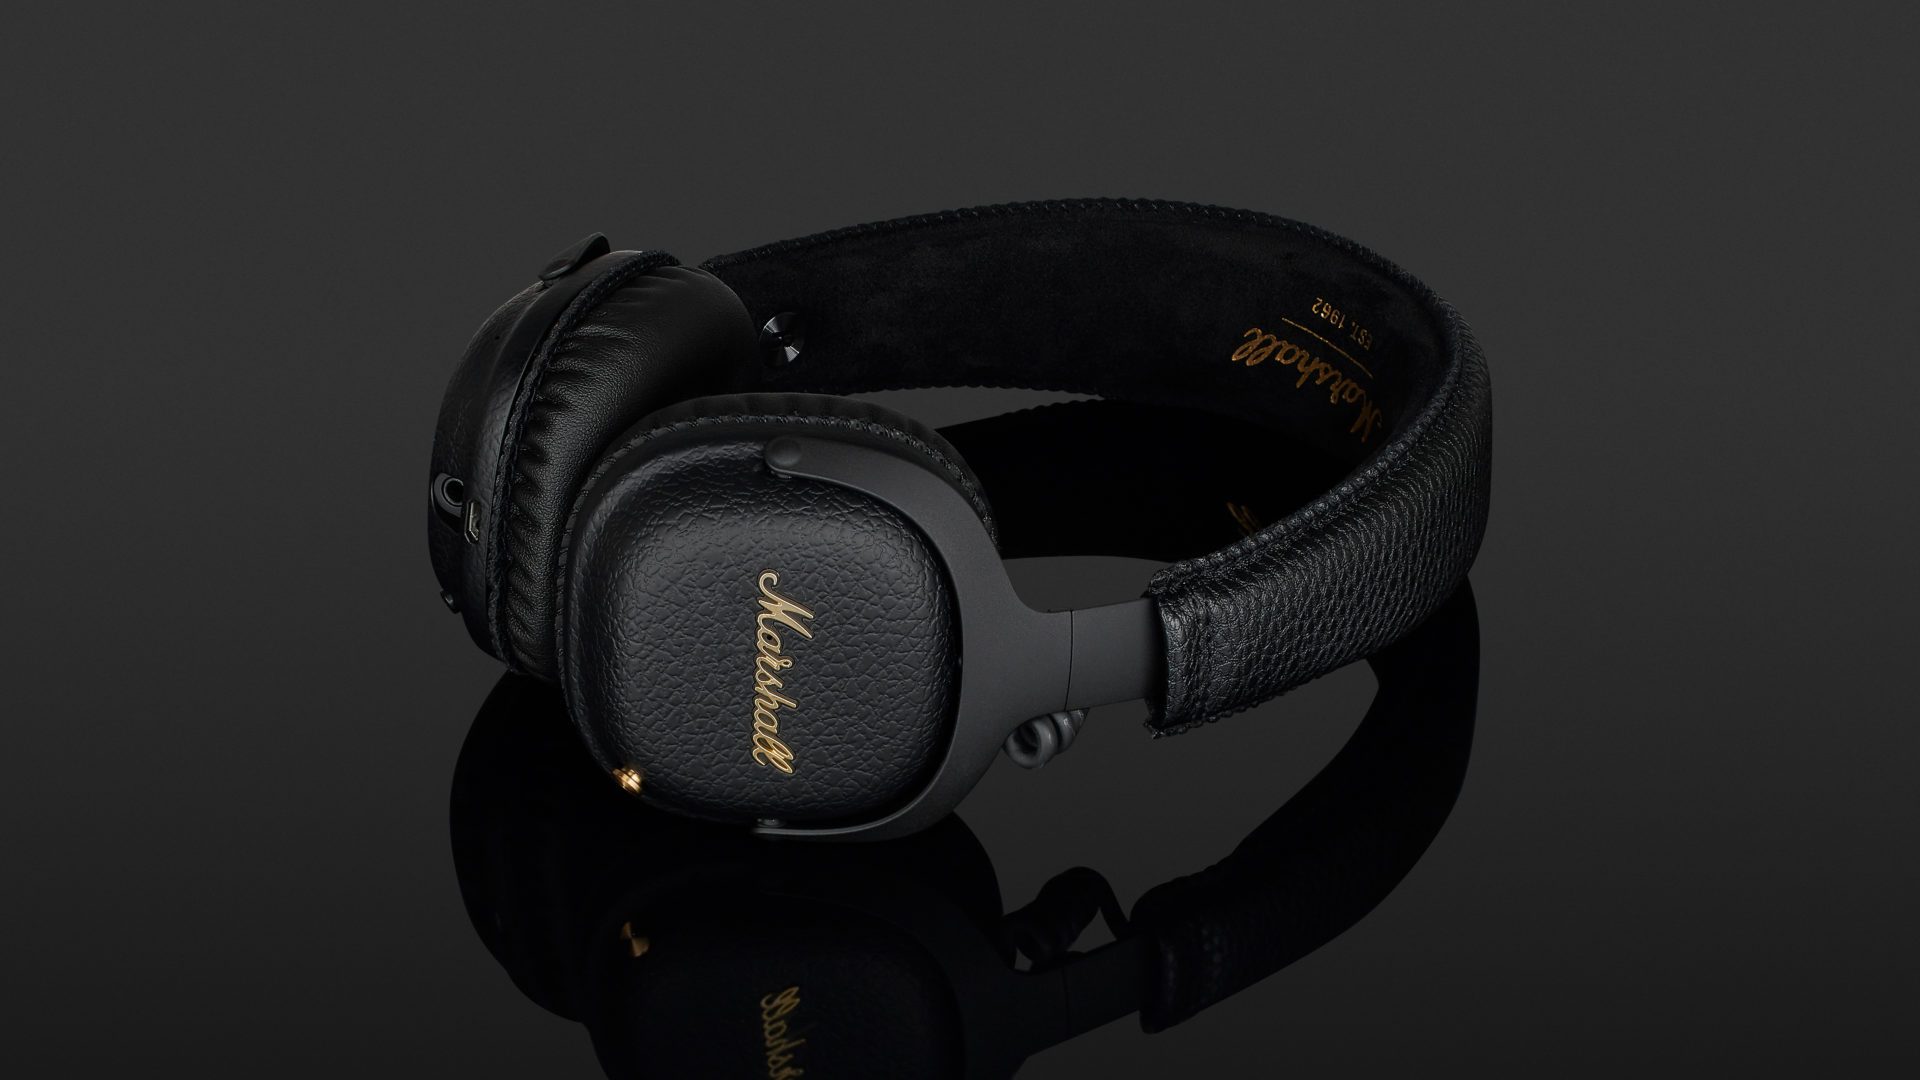 Marshall Mid A.N.C. Review | headphonecheck.com